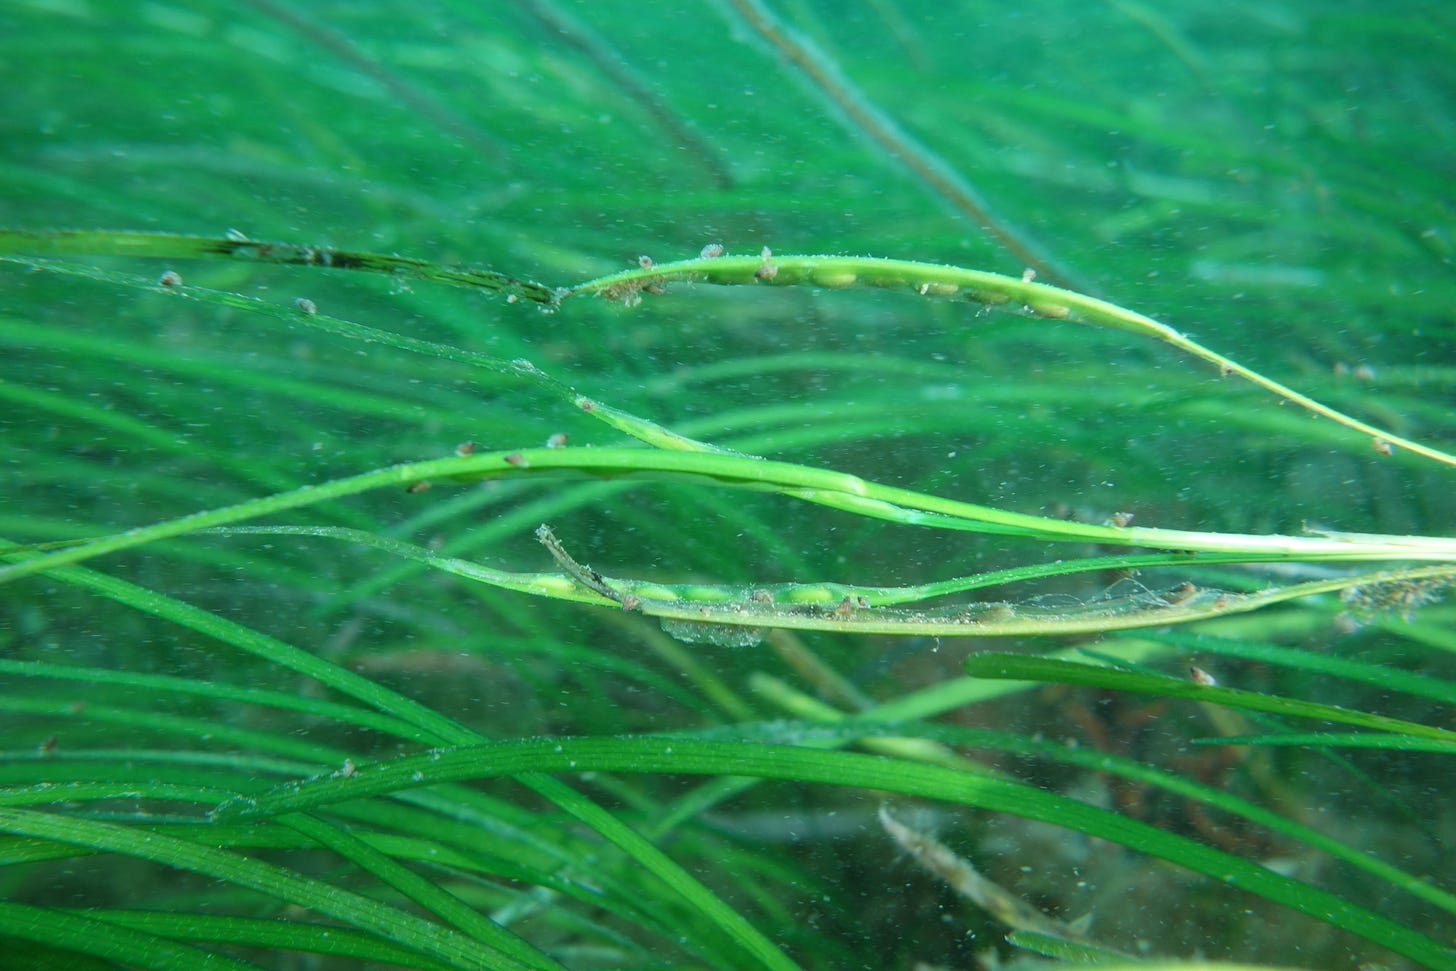 Seagrass reproductive seed shoot